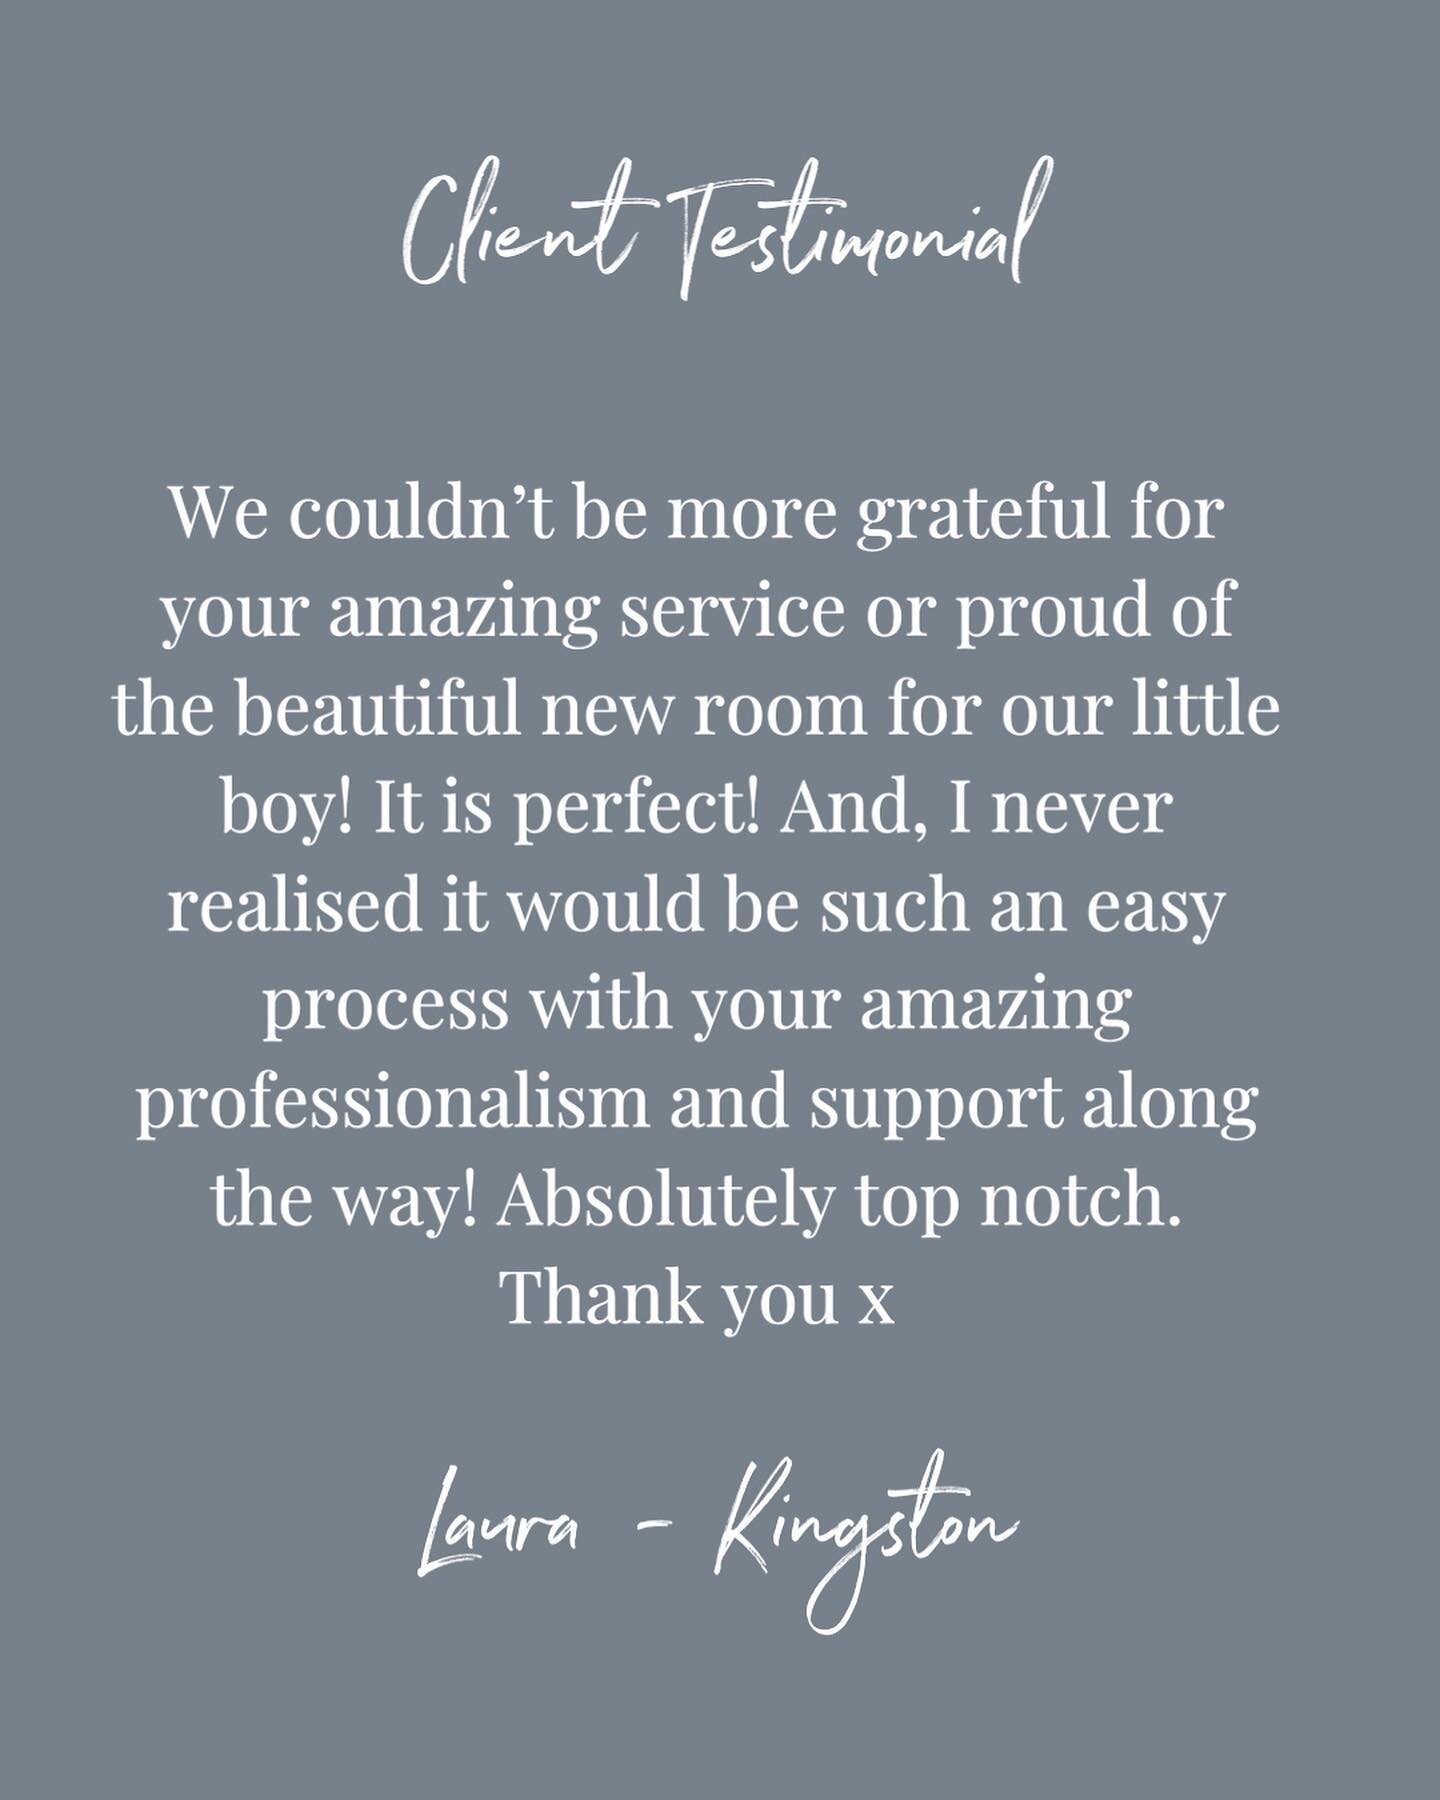 Note to self, whenever a wave of imposters syndrome strikes in the future, read reviews from your amazing clients to give you a little lift. It honestly makes my day that I can create spaces that my clients love and feel proud of. 
Love my clients, l